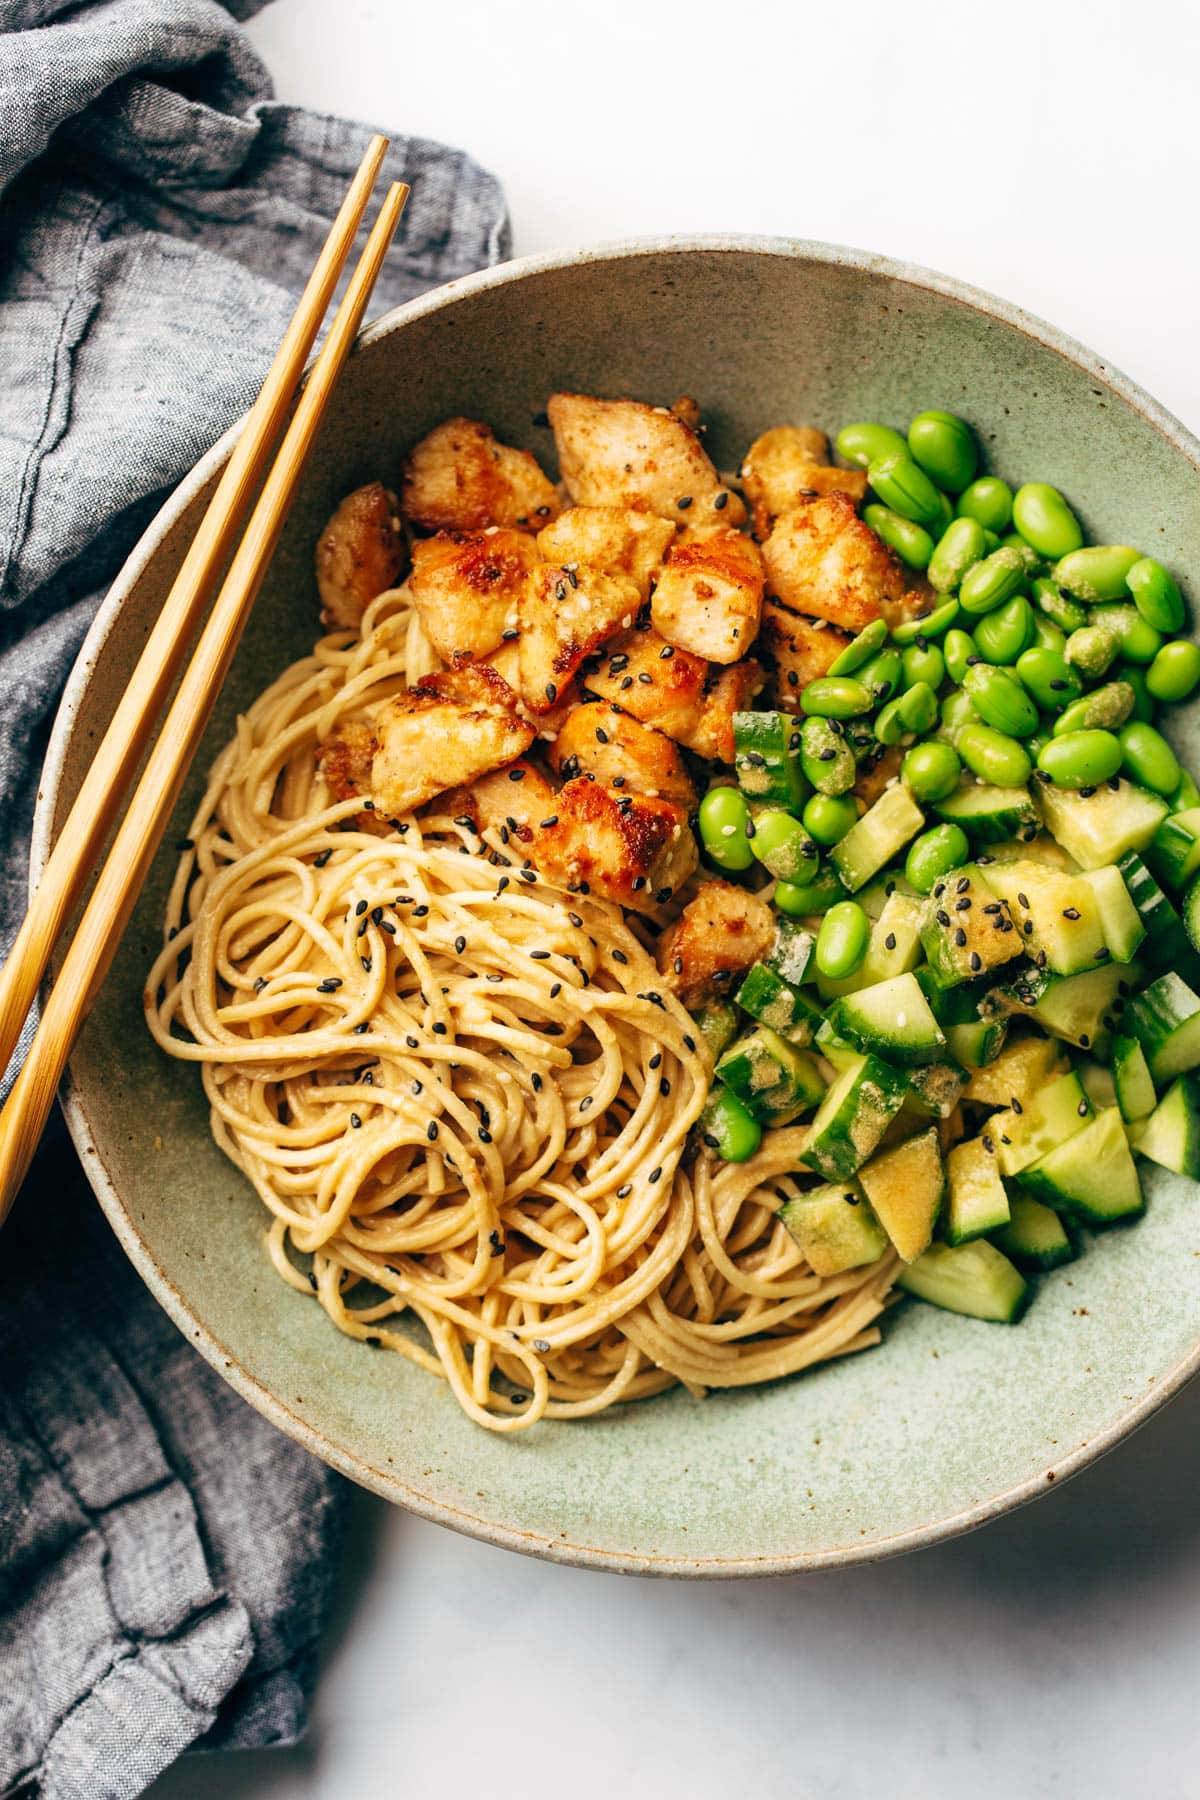 Sauteed chicken, edamame and cucumber over a bed of spaghetti.